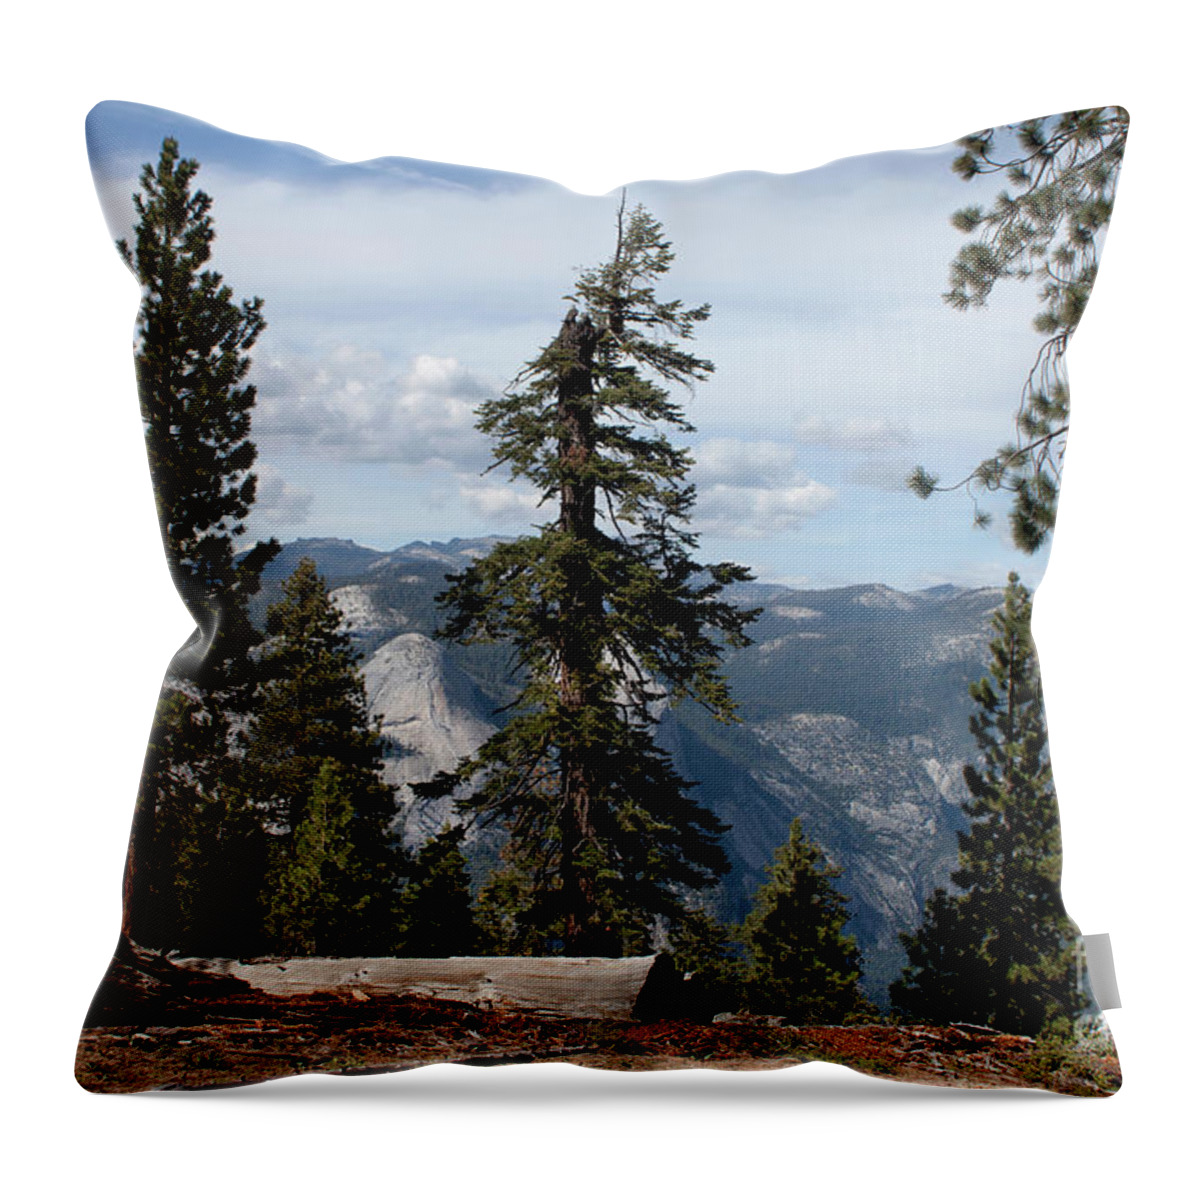 Glacier Point Throw Pillow featuring the photograph Yosemite Park by Ivete Basso Photography